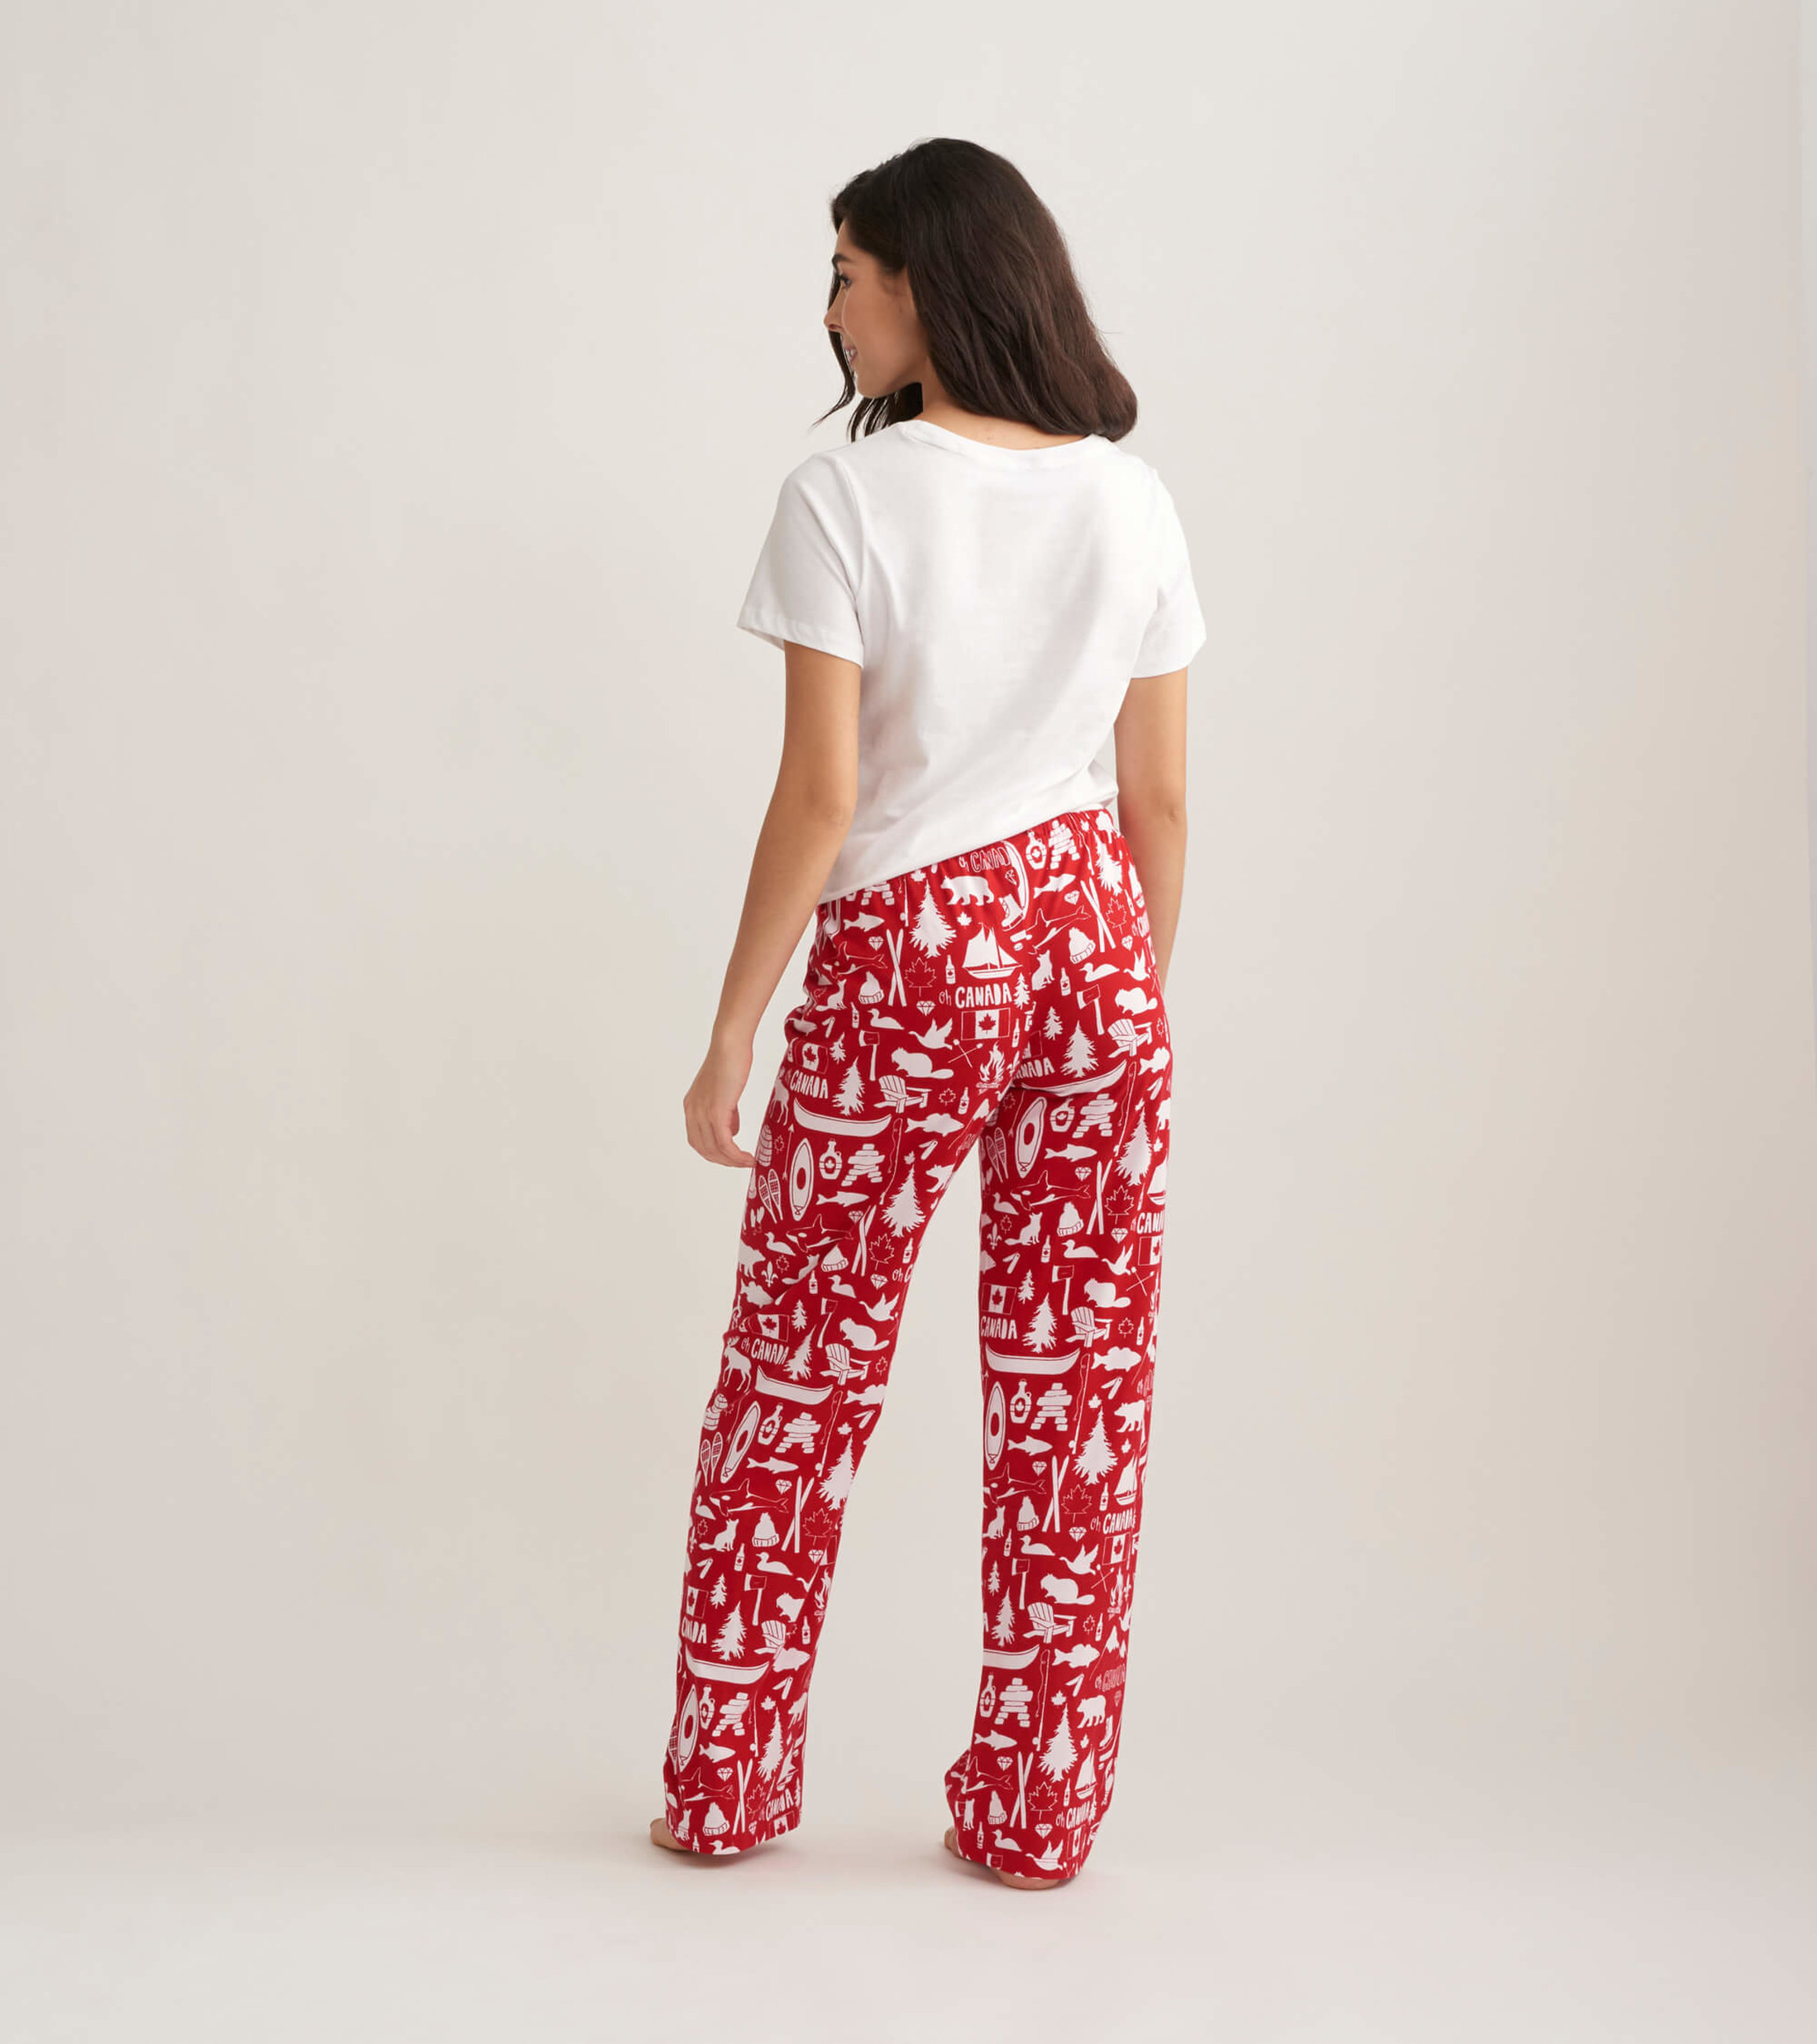 Oh Canada Women's Jersey Pajama Pants - Little Blue House US